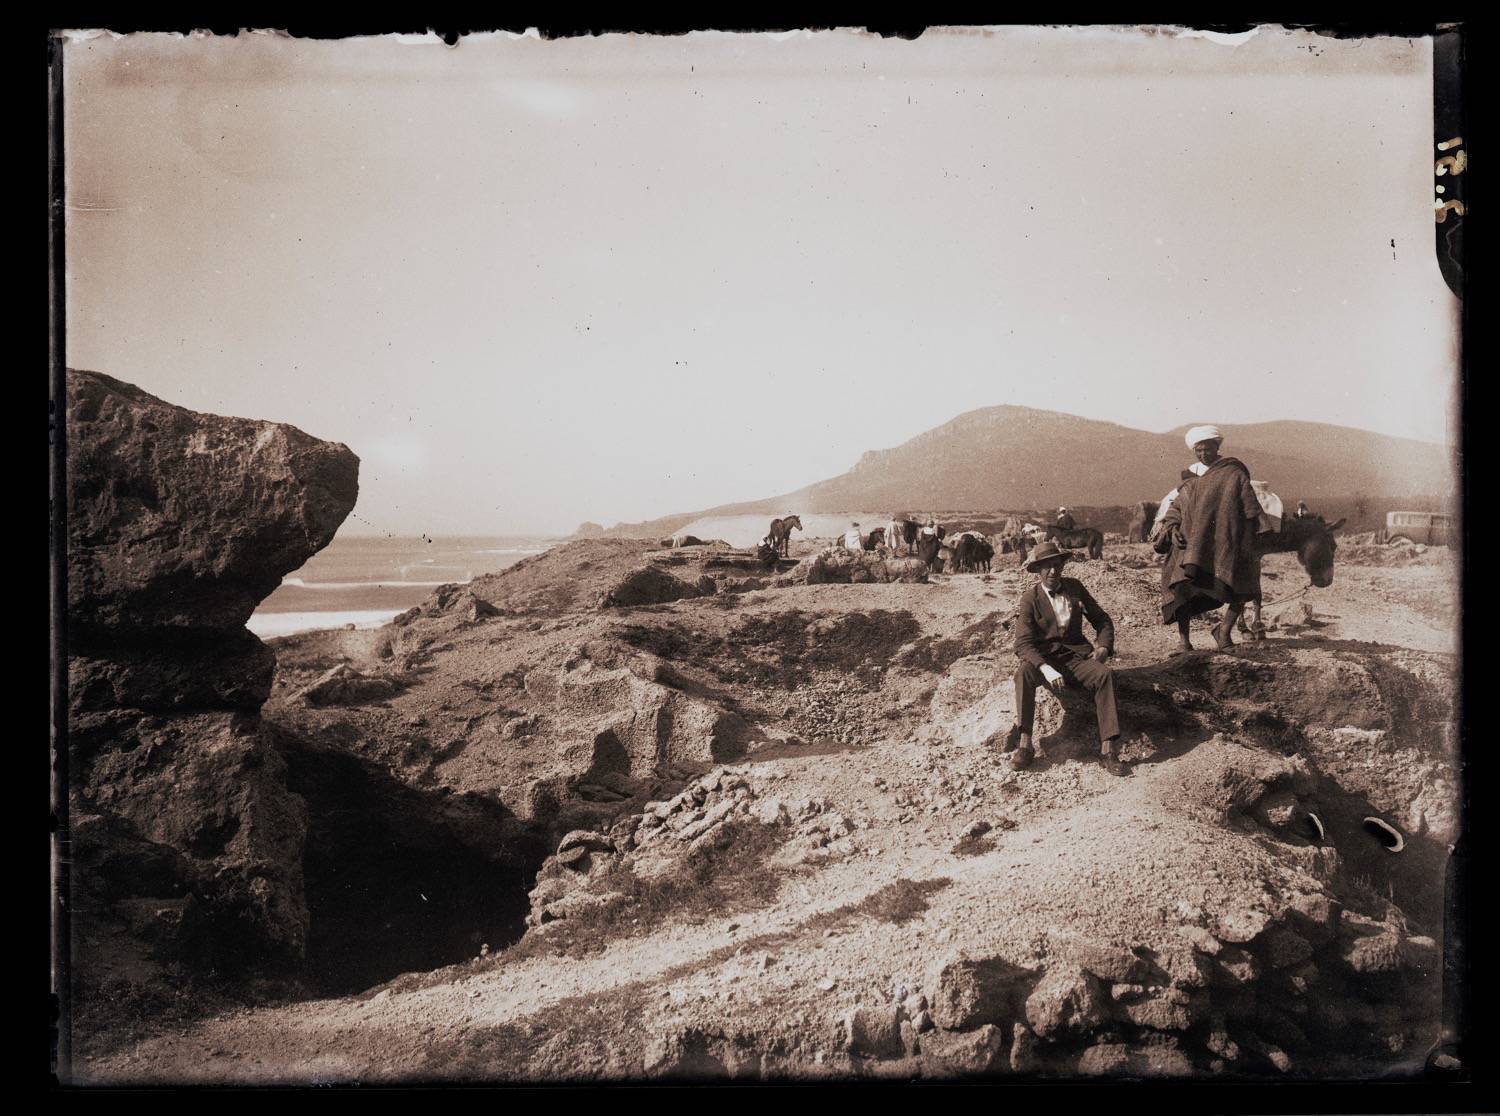 <p>Landscape view, Moroccan and European men on a trail, probably on route to Asilah</p>